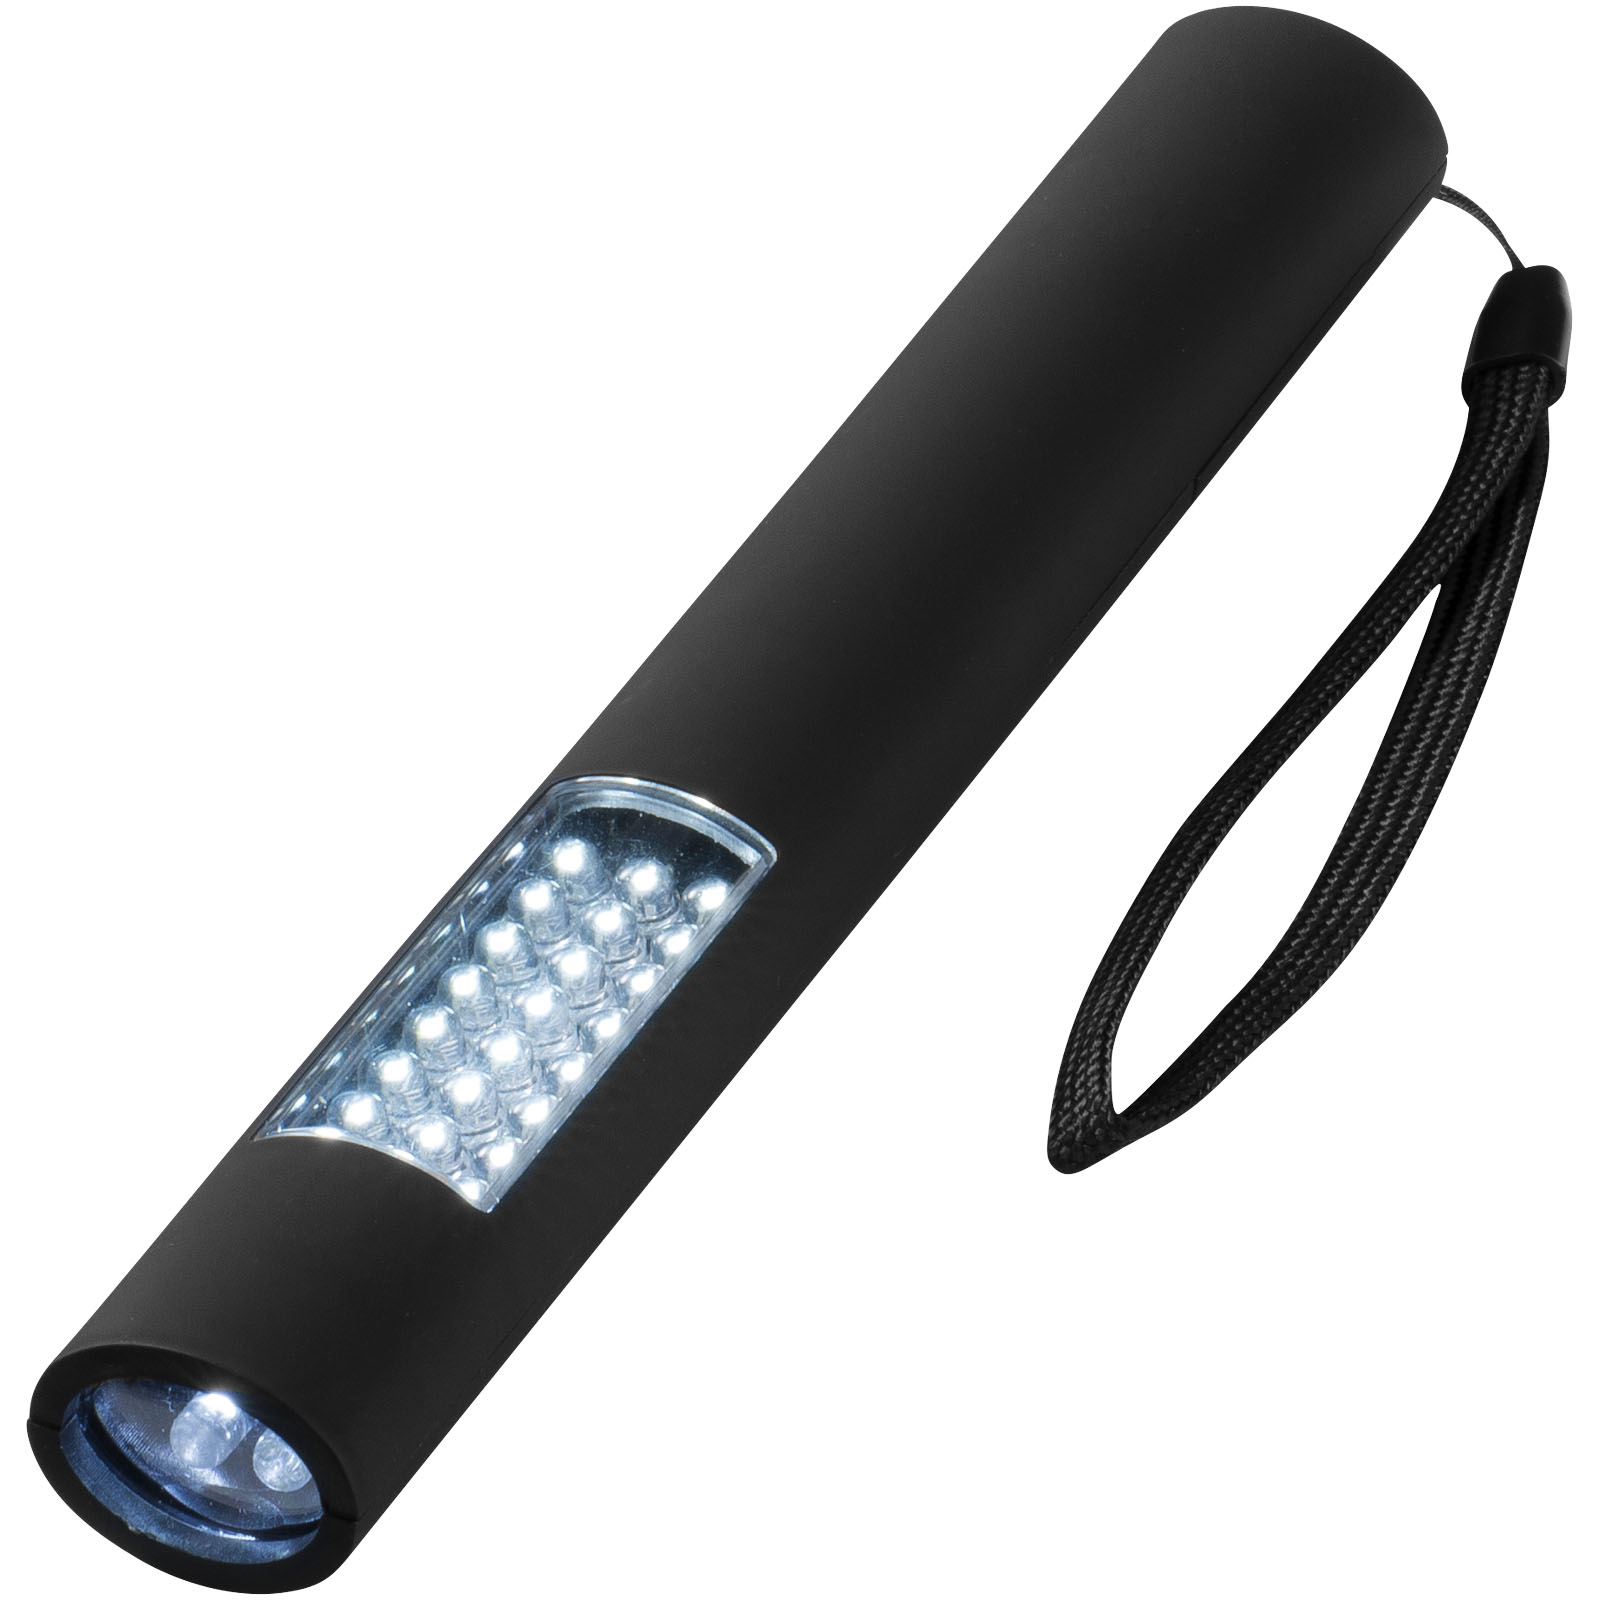 Advertising Lamps - Lutz 28-LED magnetic torch light - 0